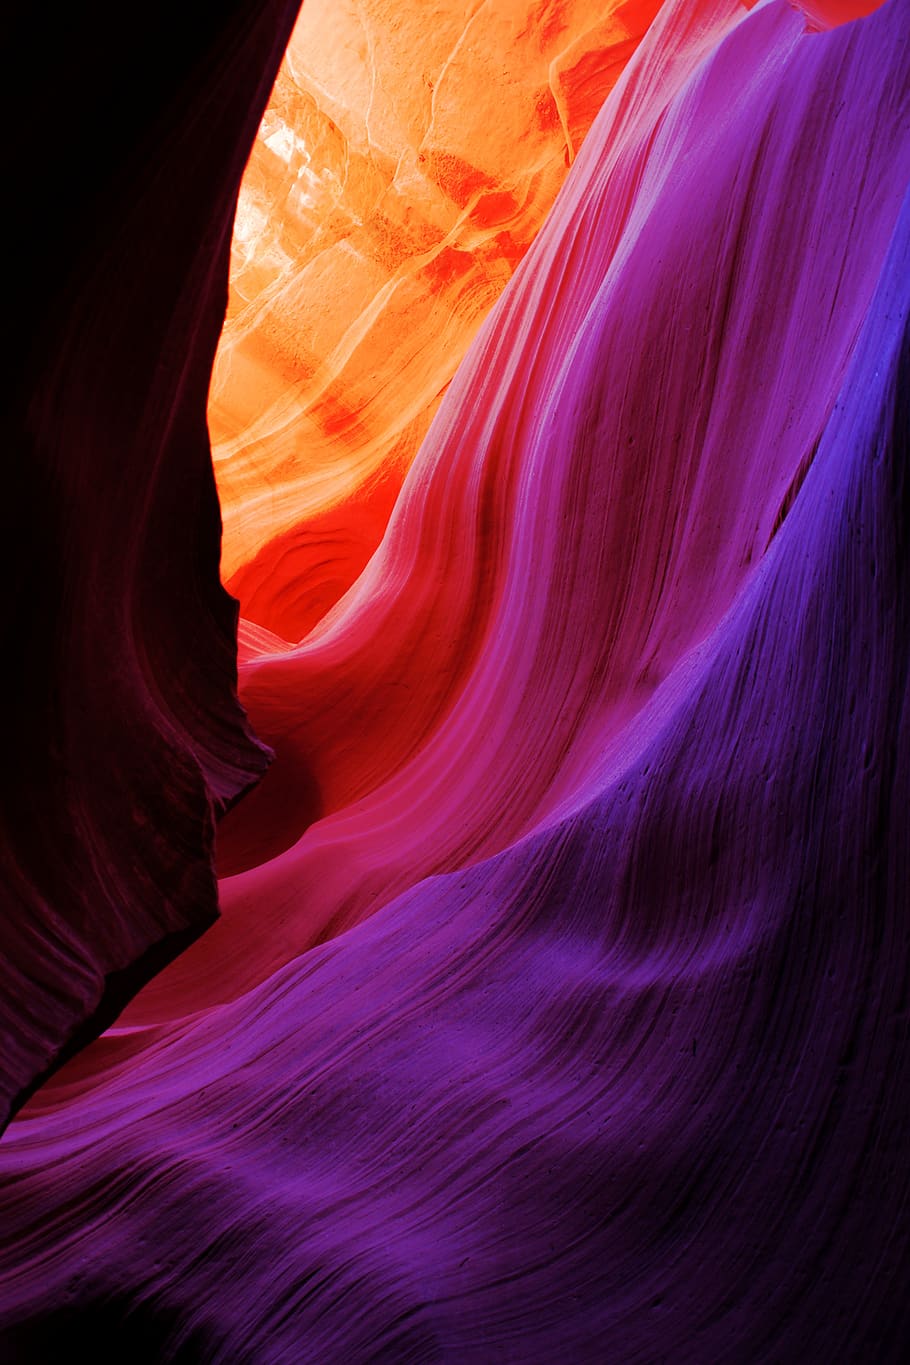 200+ Canyon wallpapers HD | Download Free backgrounds